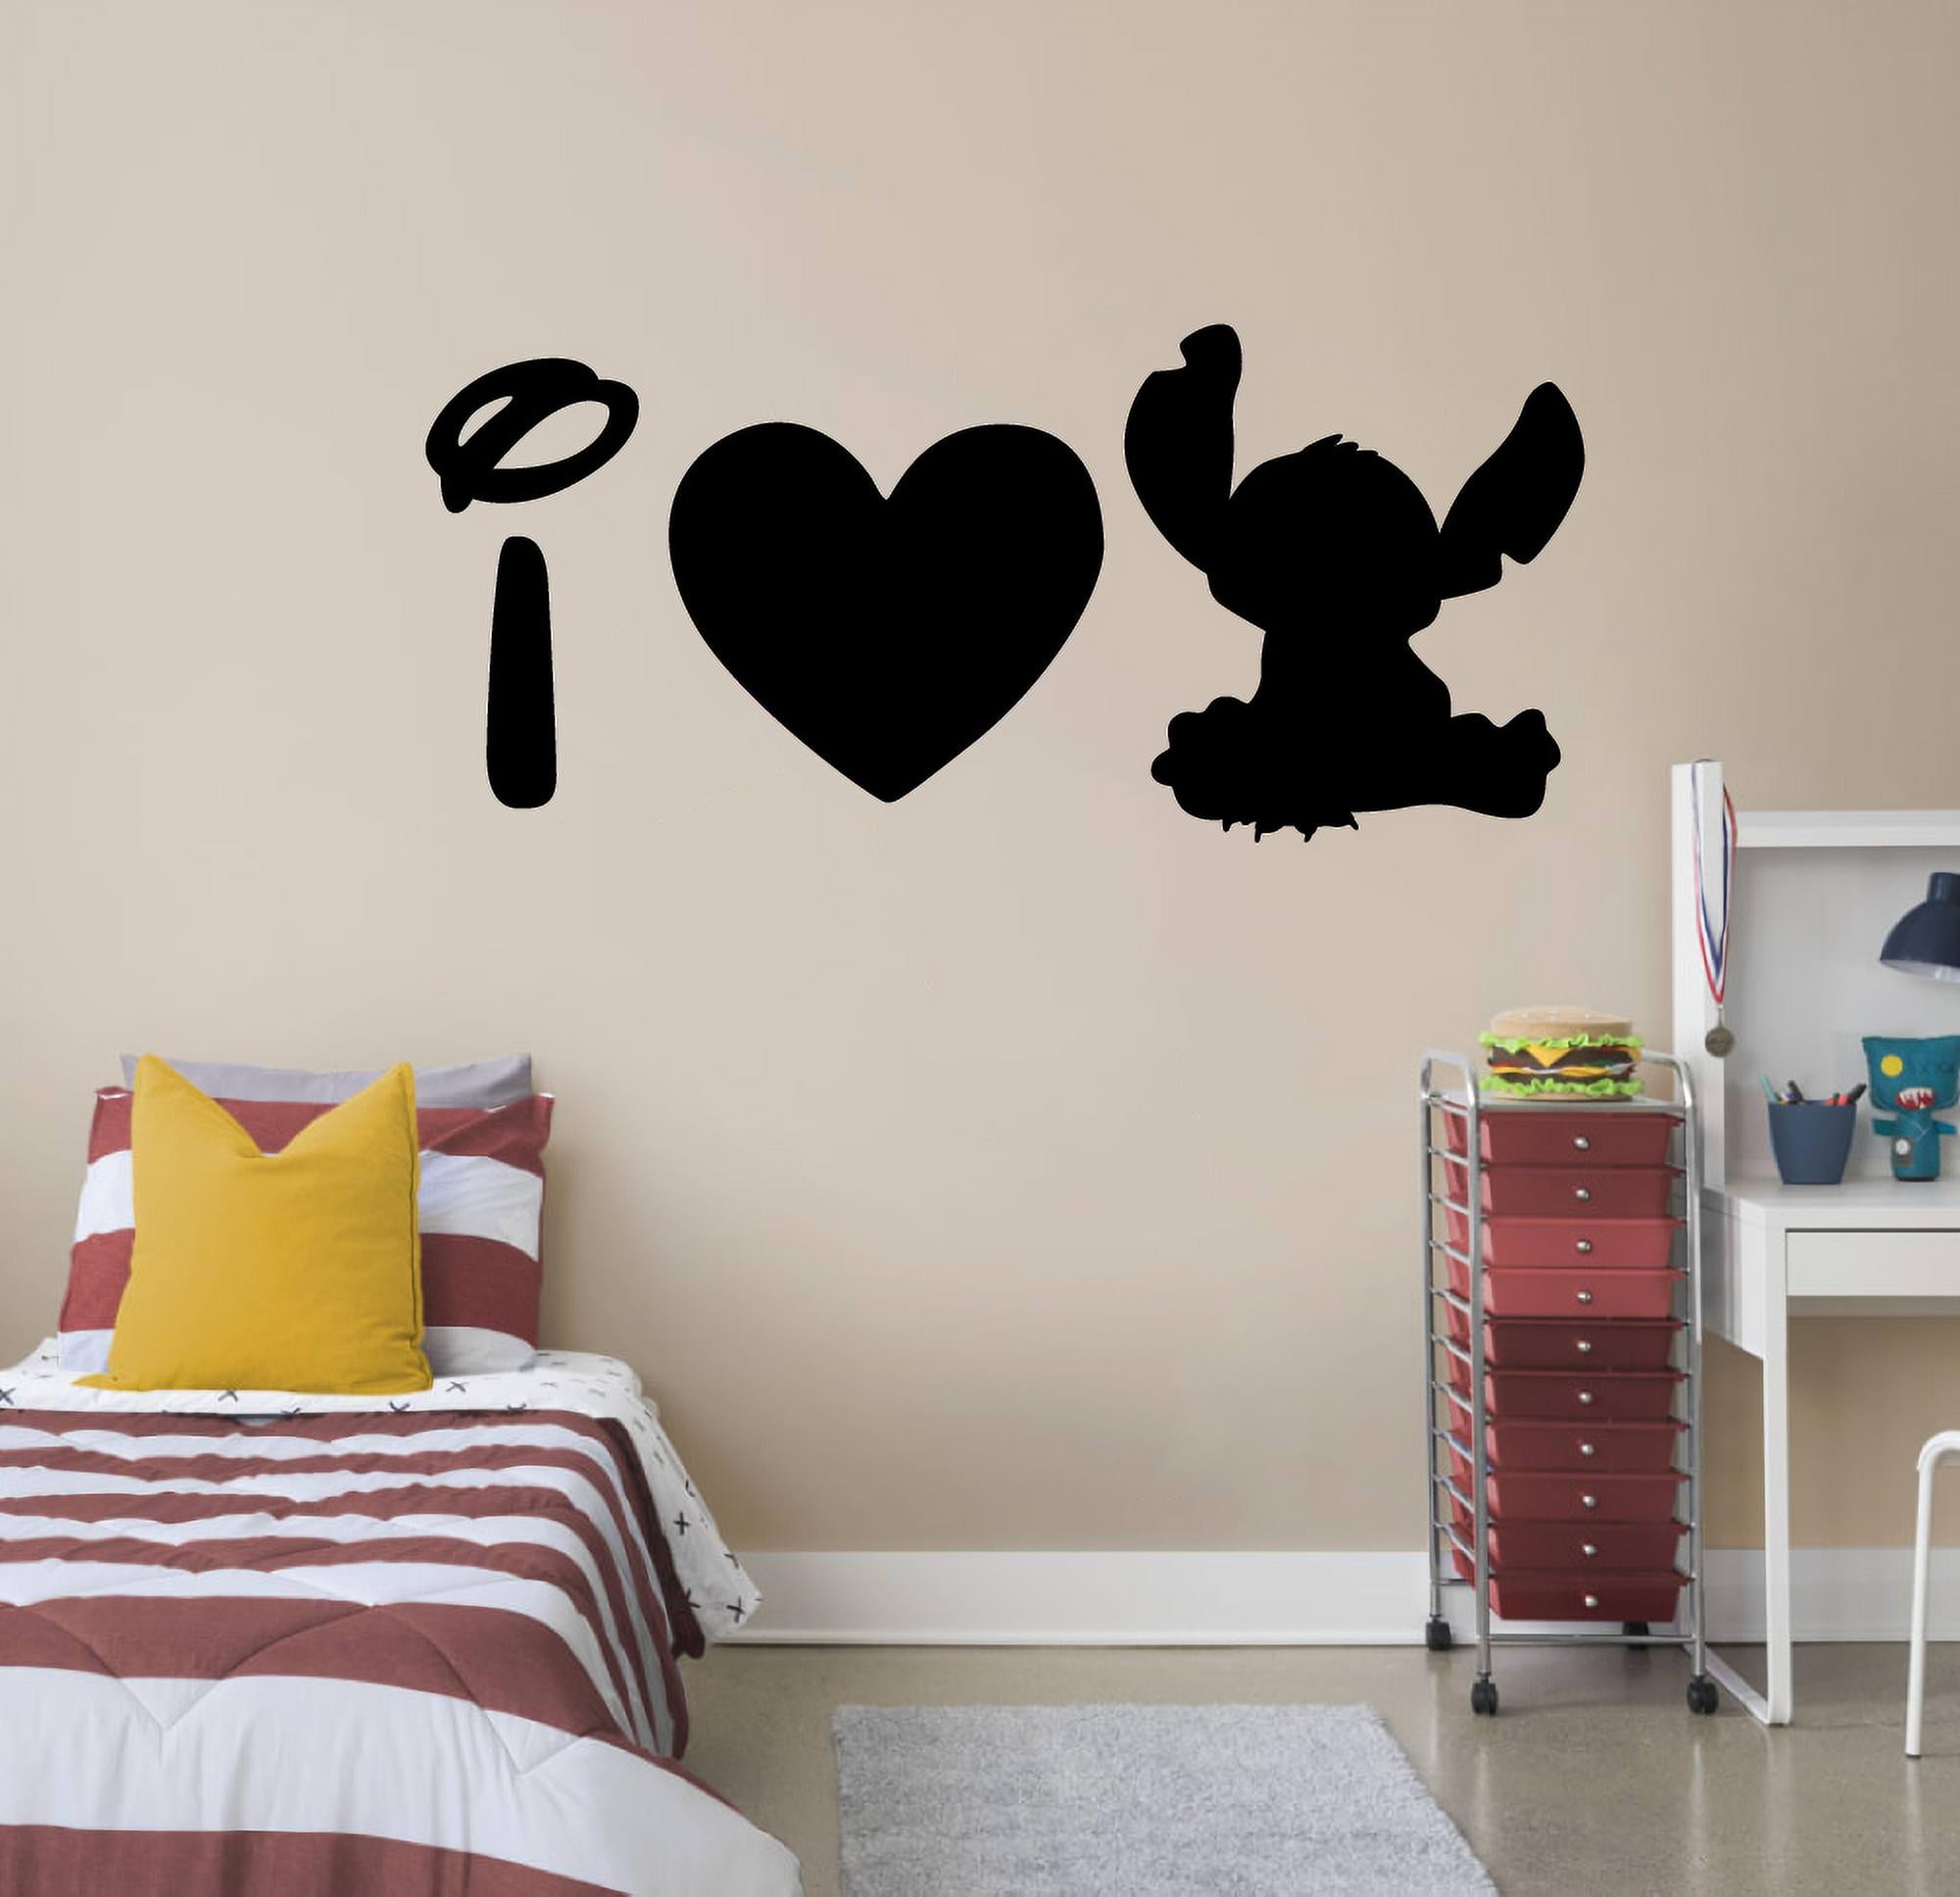 OREGON DUCKS Wall Sticker Removable Vinyl Quote Decal Canvas B 